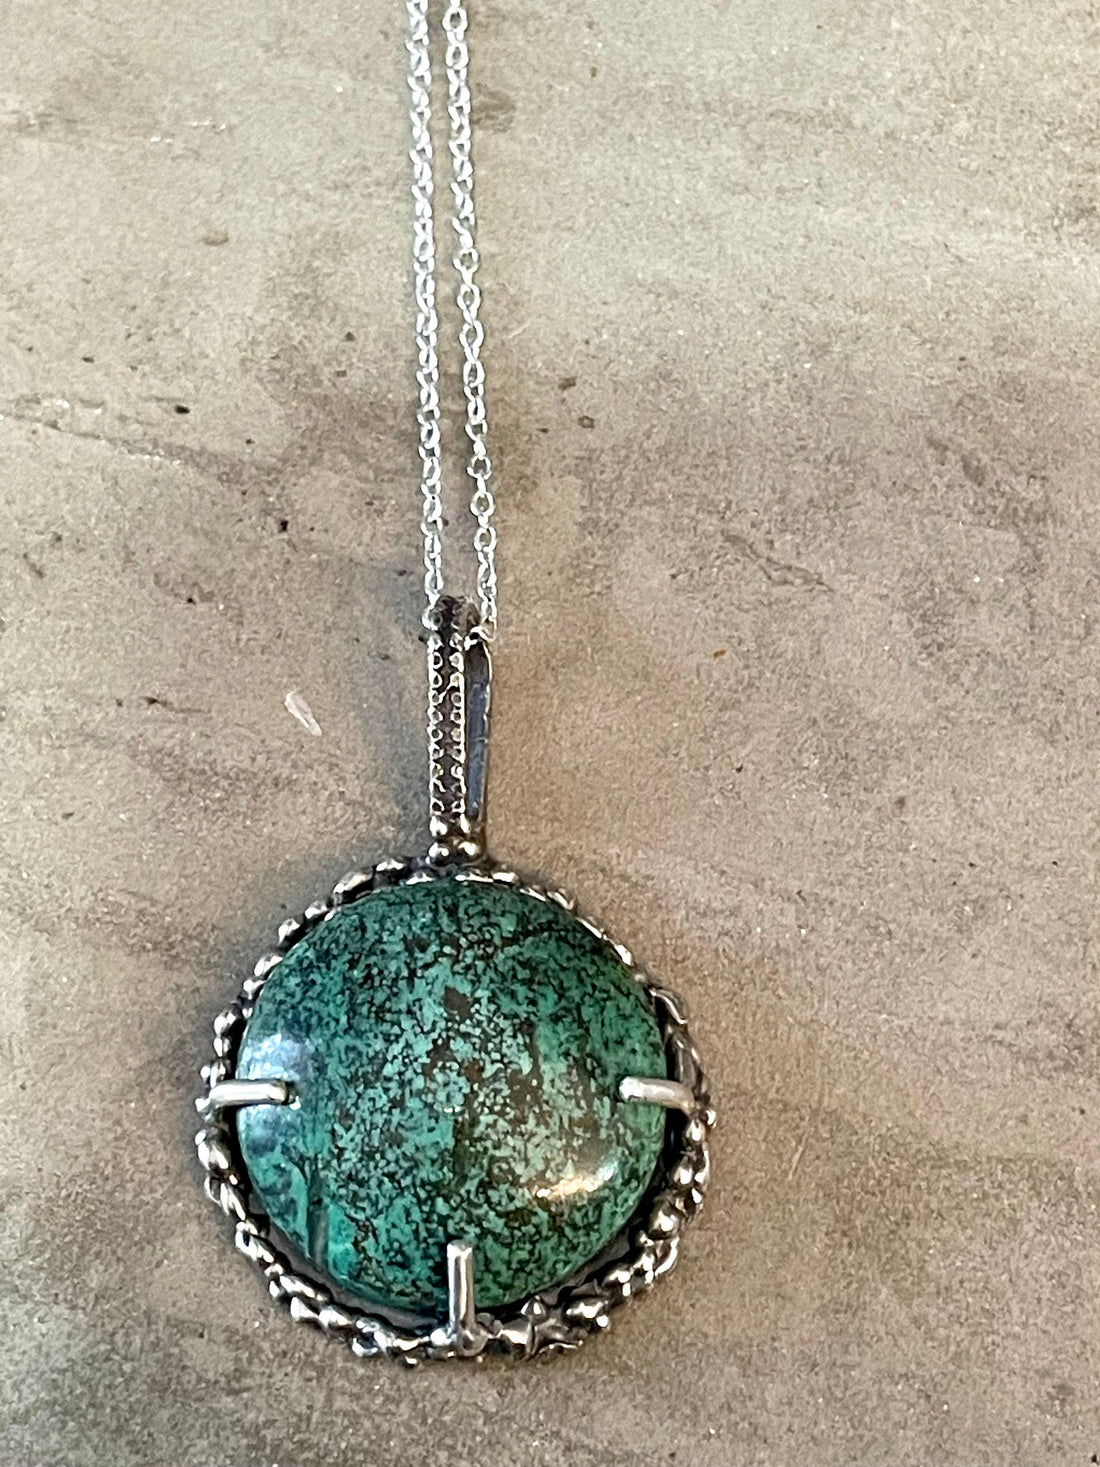 Hubei Turquoise Sterling Silver Necklace - Sand and Snow Jewelry - Necklaces - One of a Kind